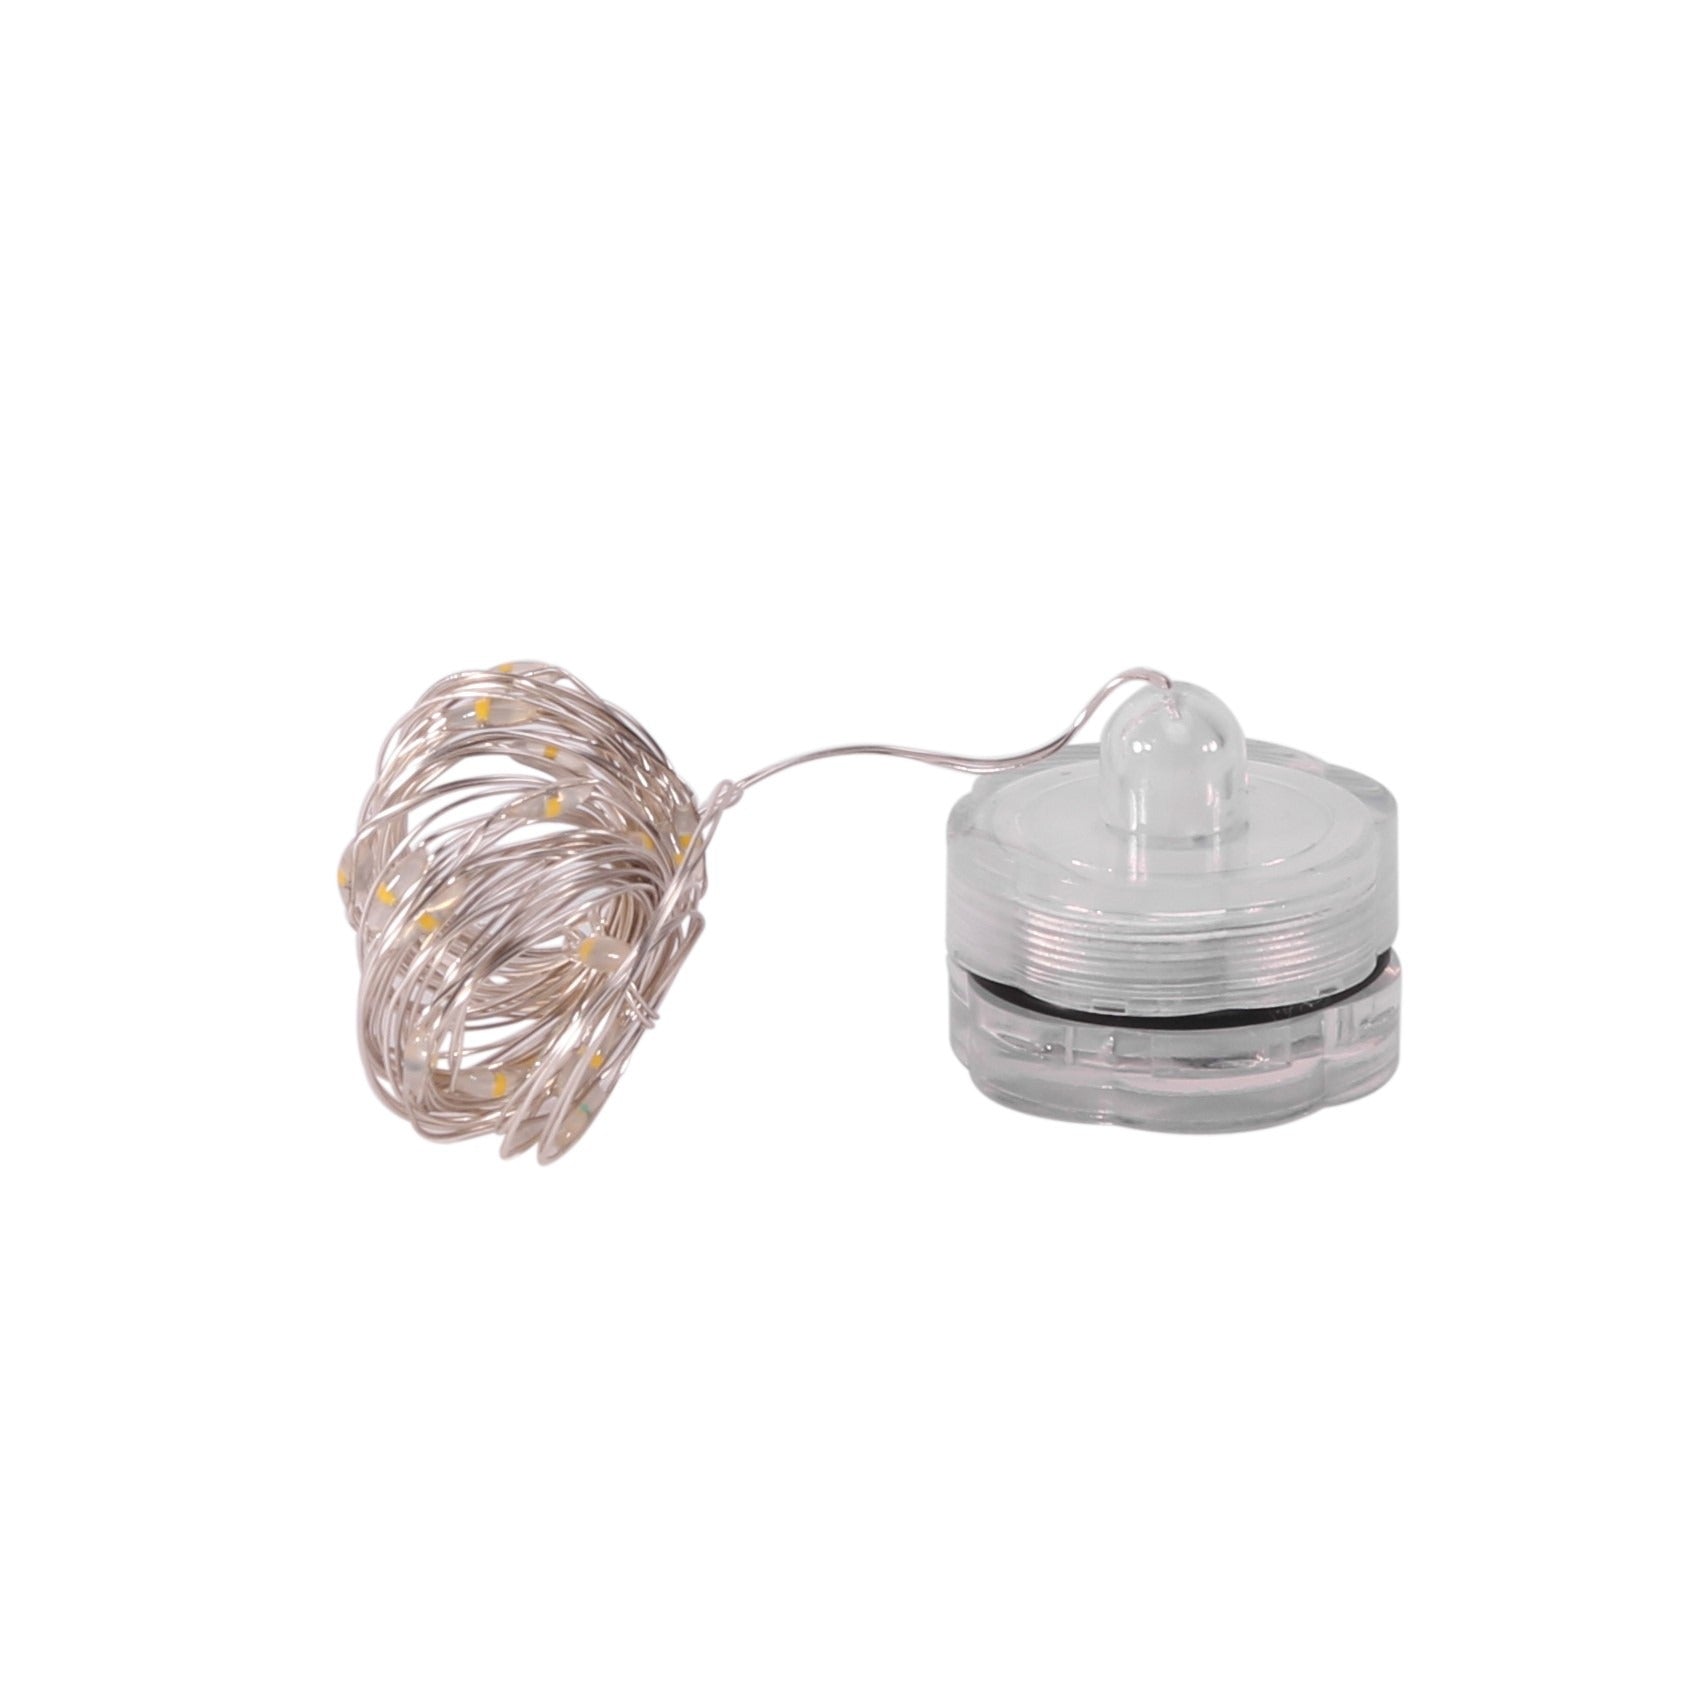 View Silver Wire submersible Warm White 10800 information